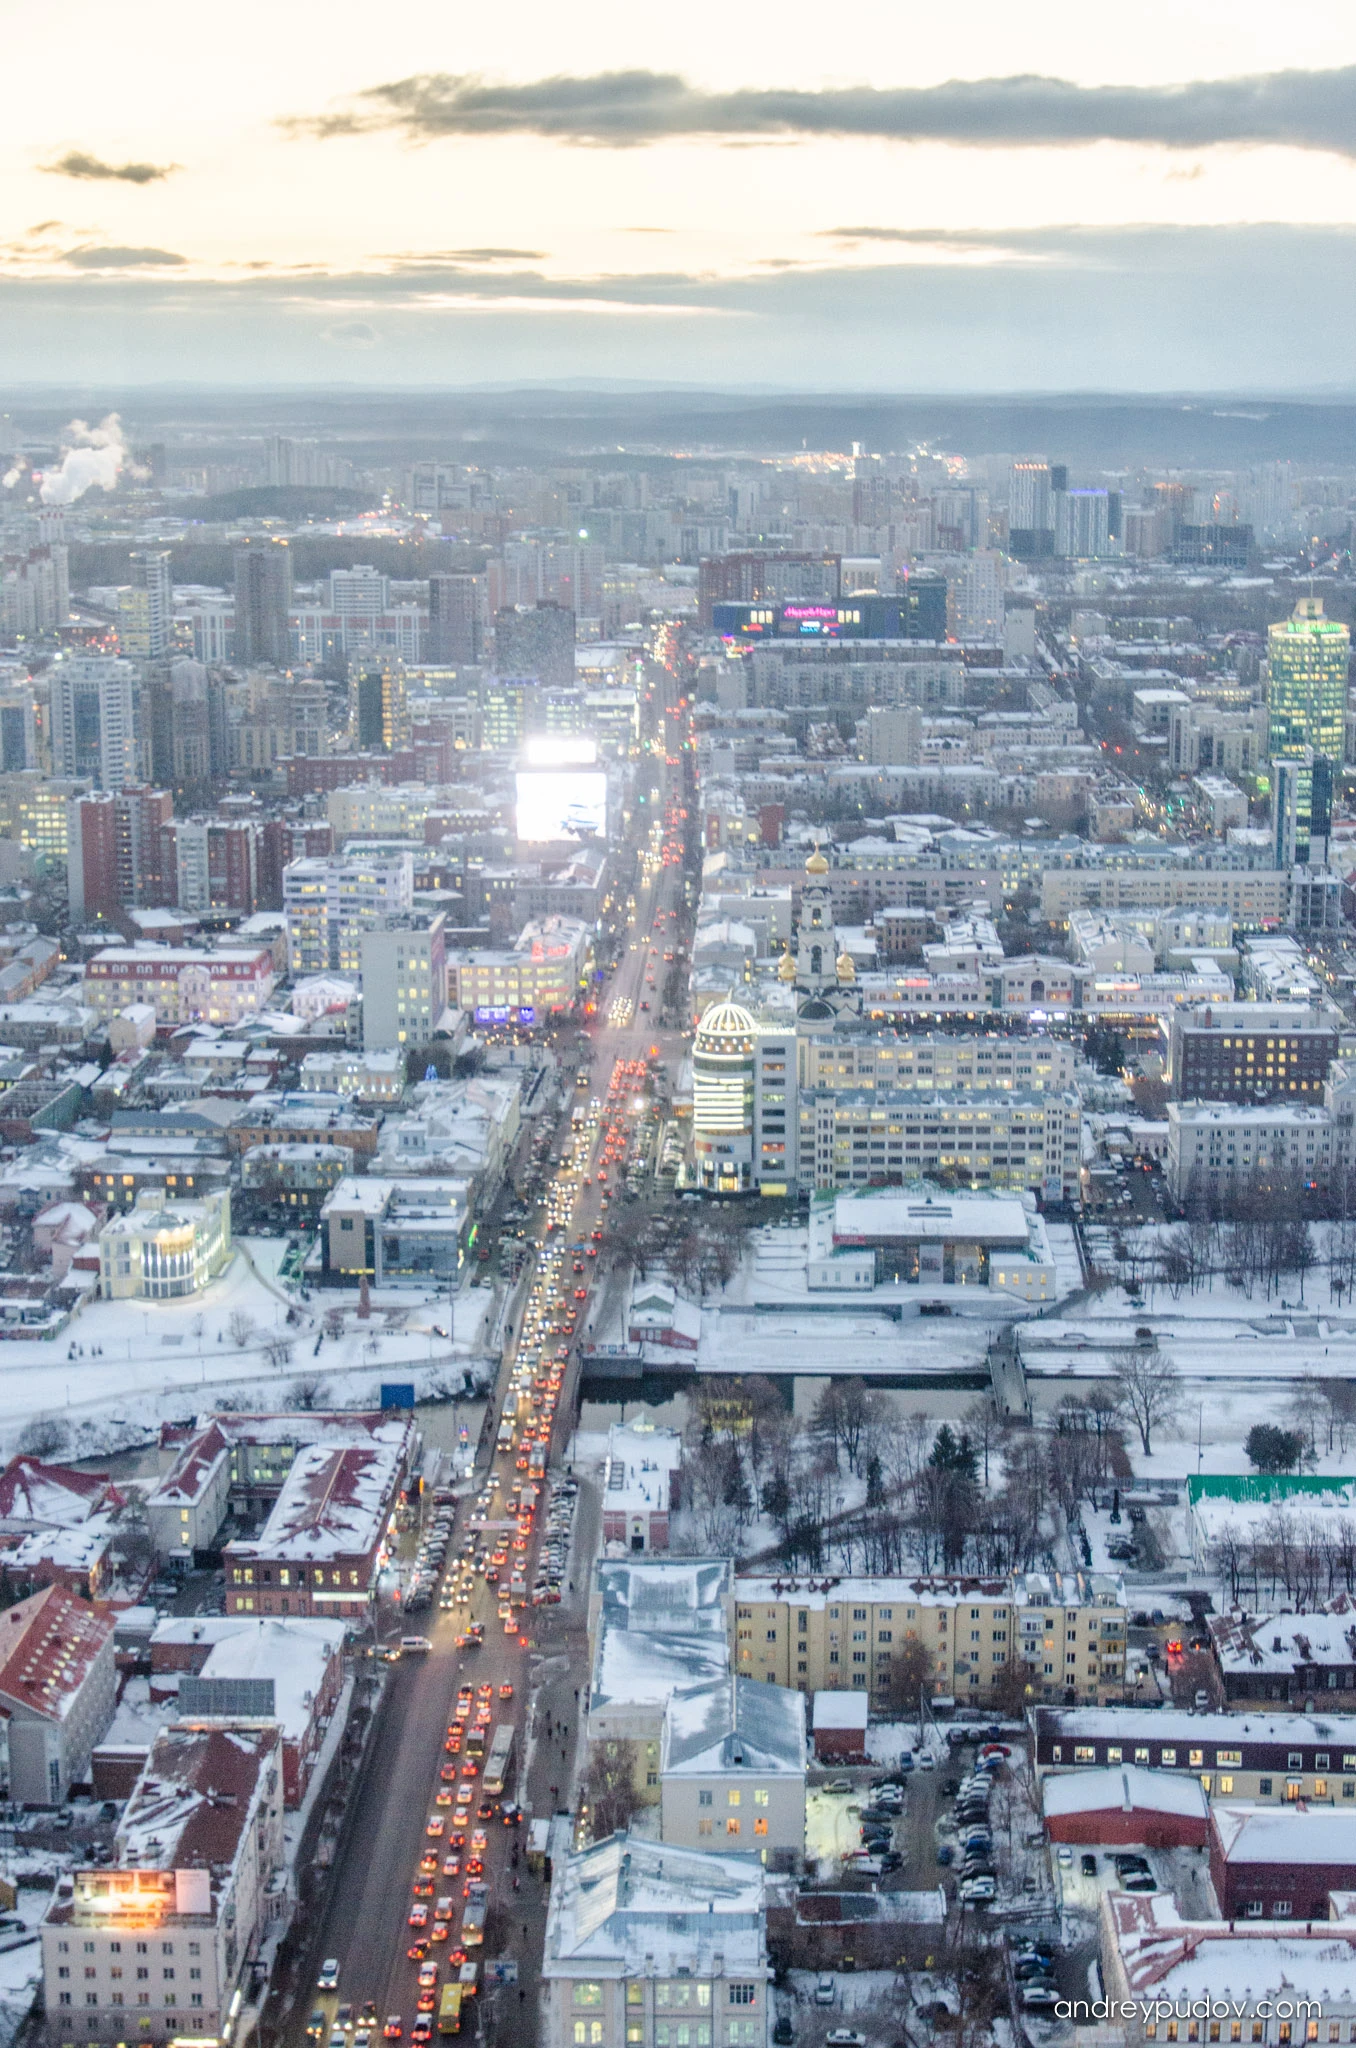 Ekaterinburg. The Picture of City